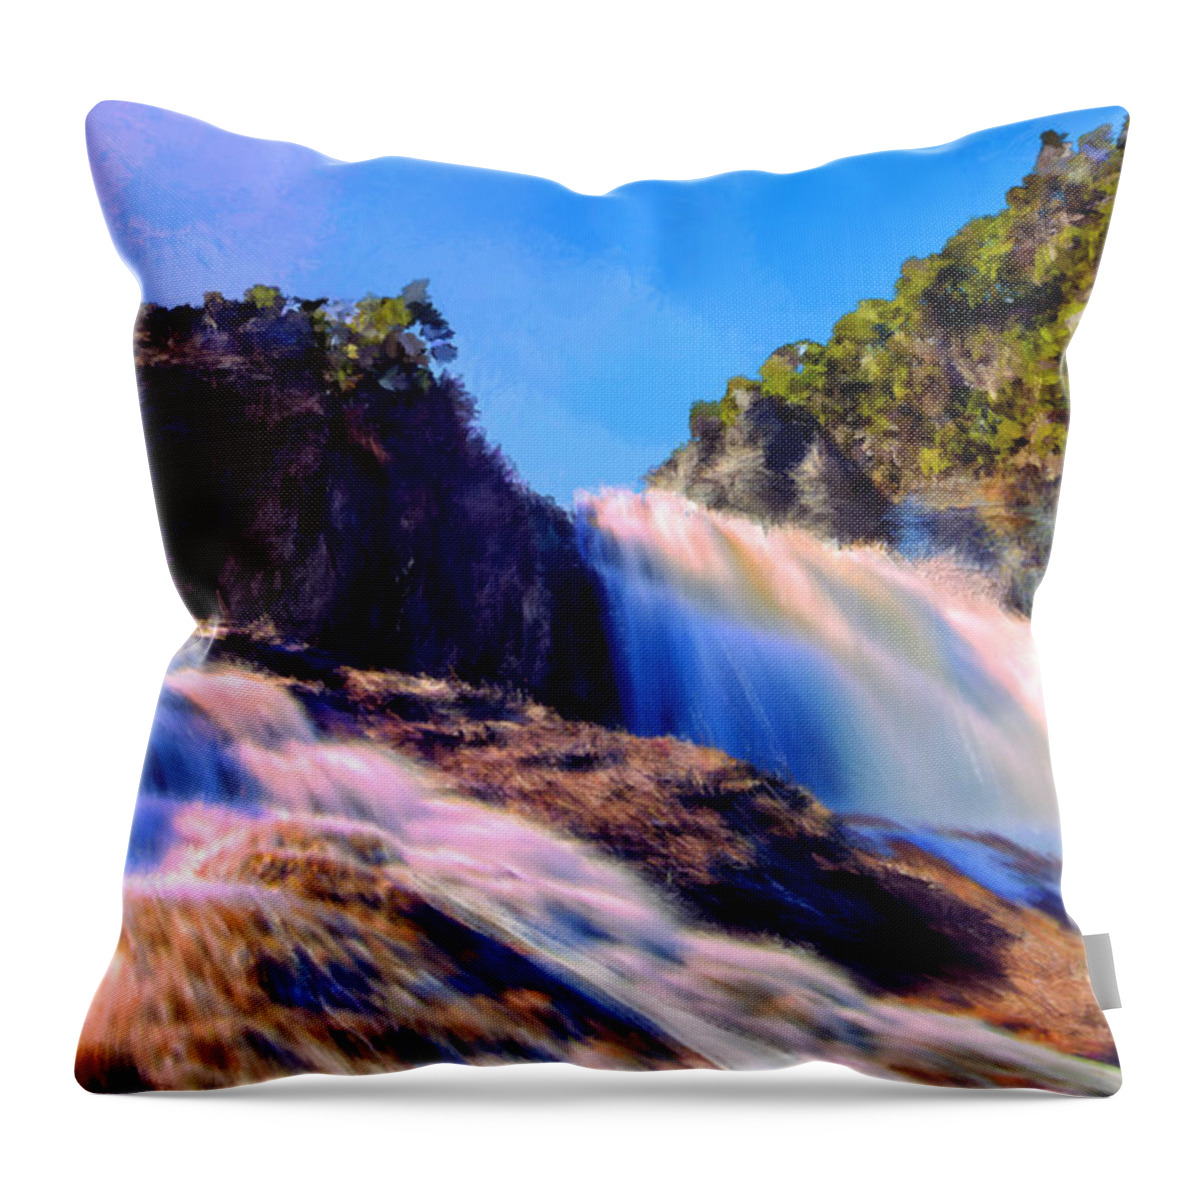 Waterfall Throw Pillow featuring the painting Wonderful Waterfall by Bruce Nutting